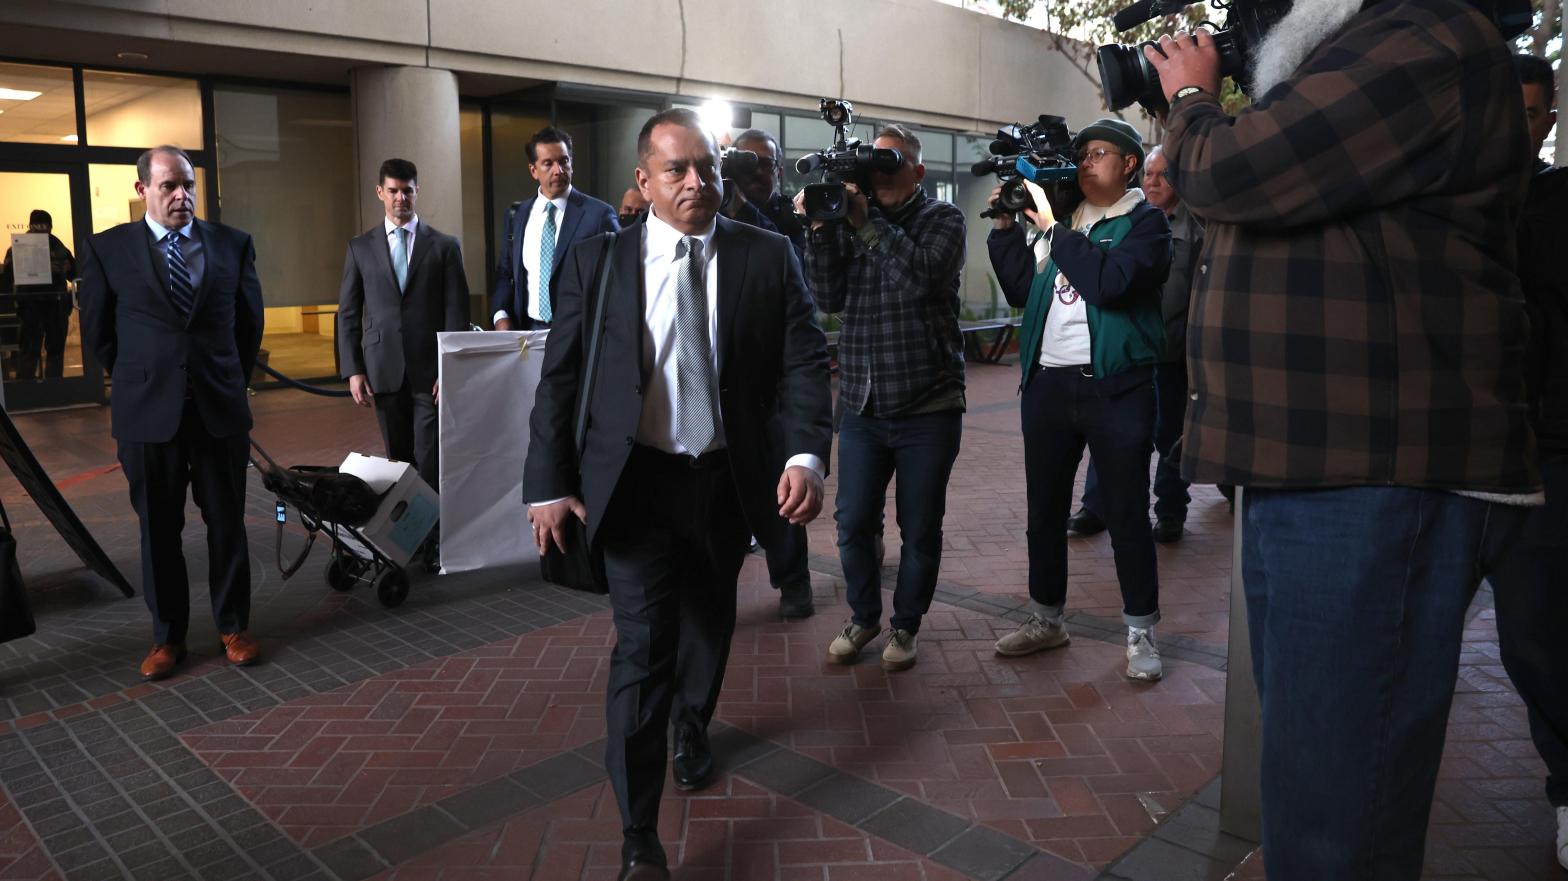 Sunny Balwani arrives at a federal court in San Jose, California on March 16, 2022. (Image: Justin Sullivan, Getty Images)